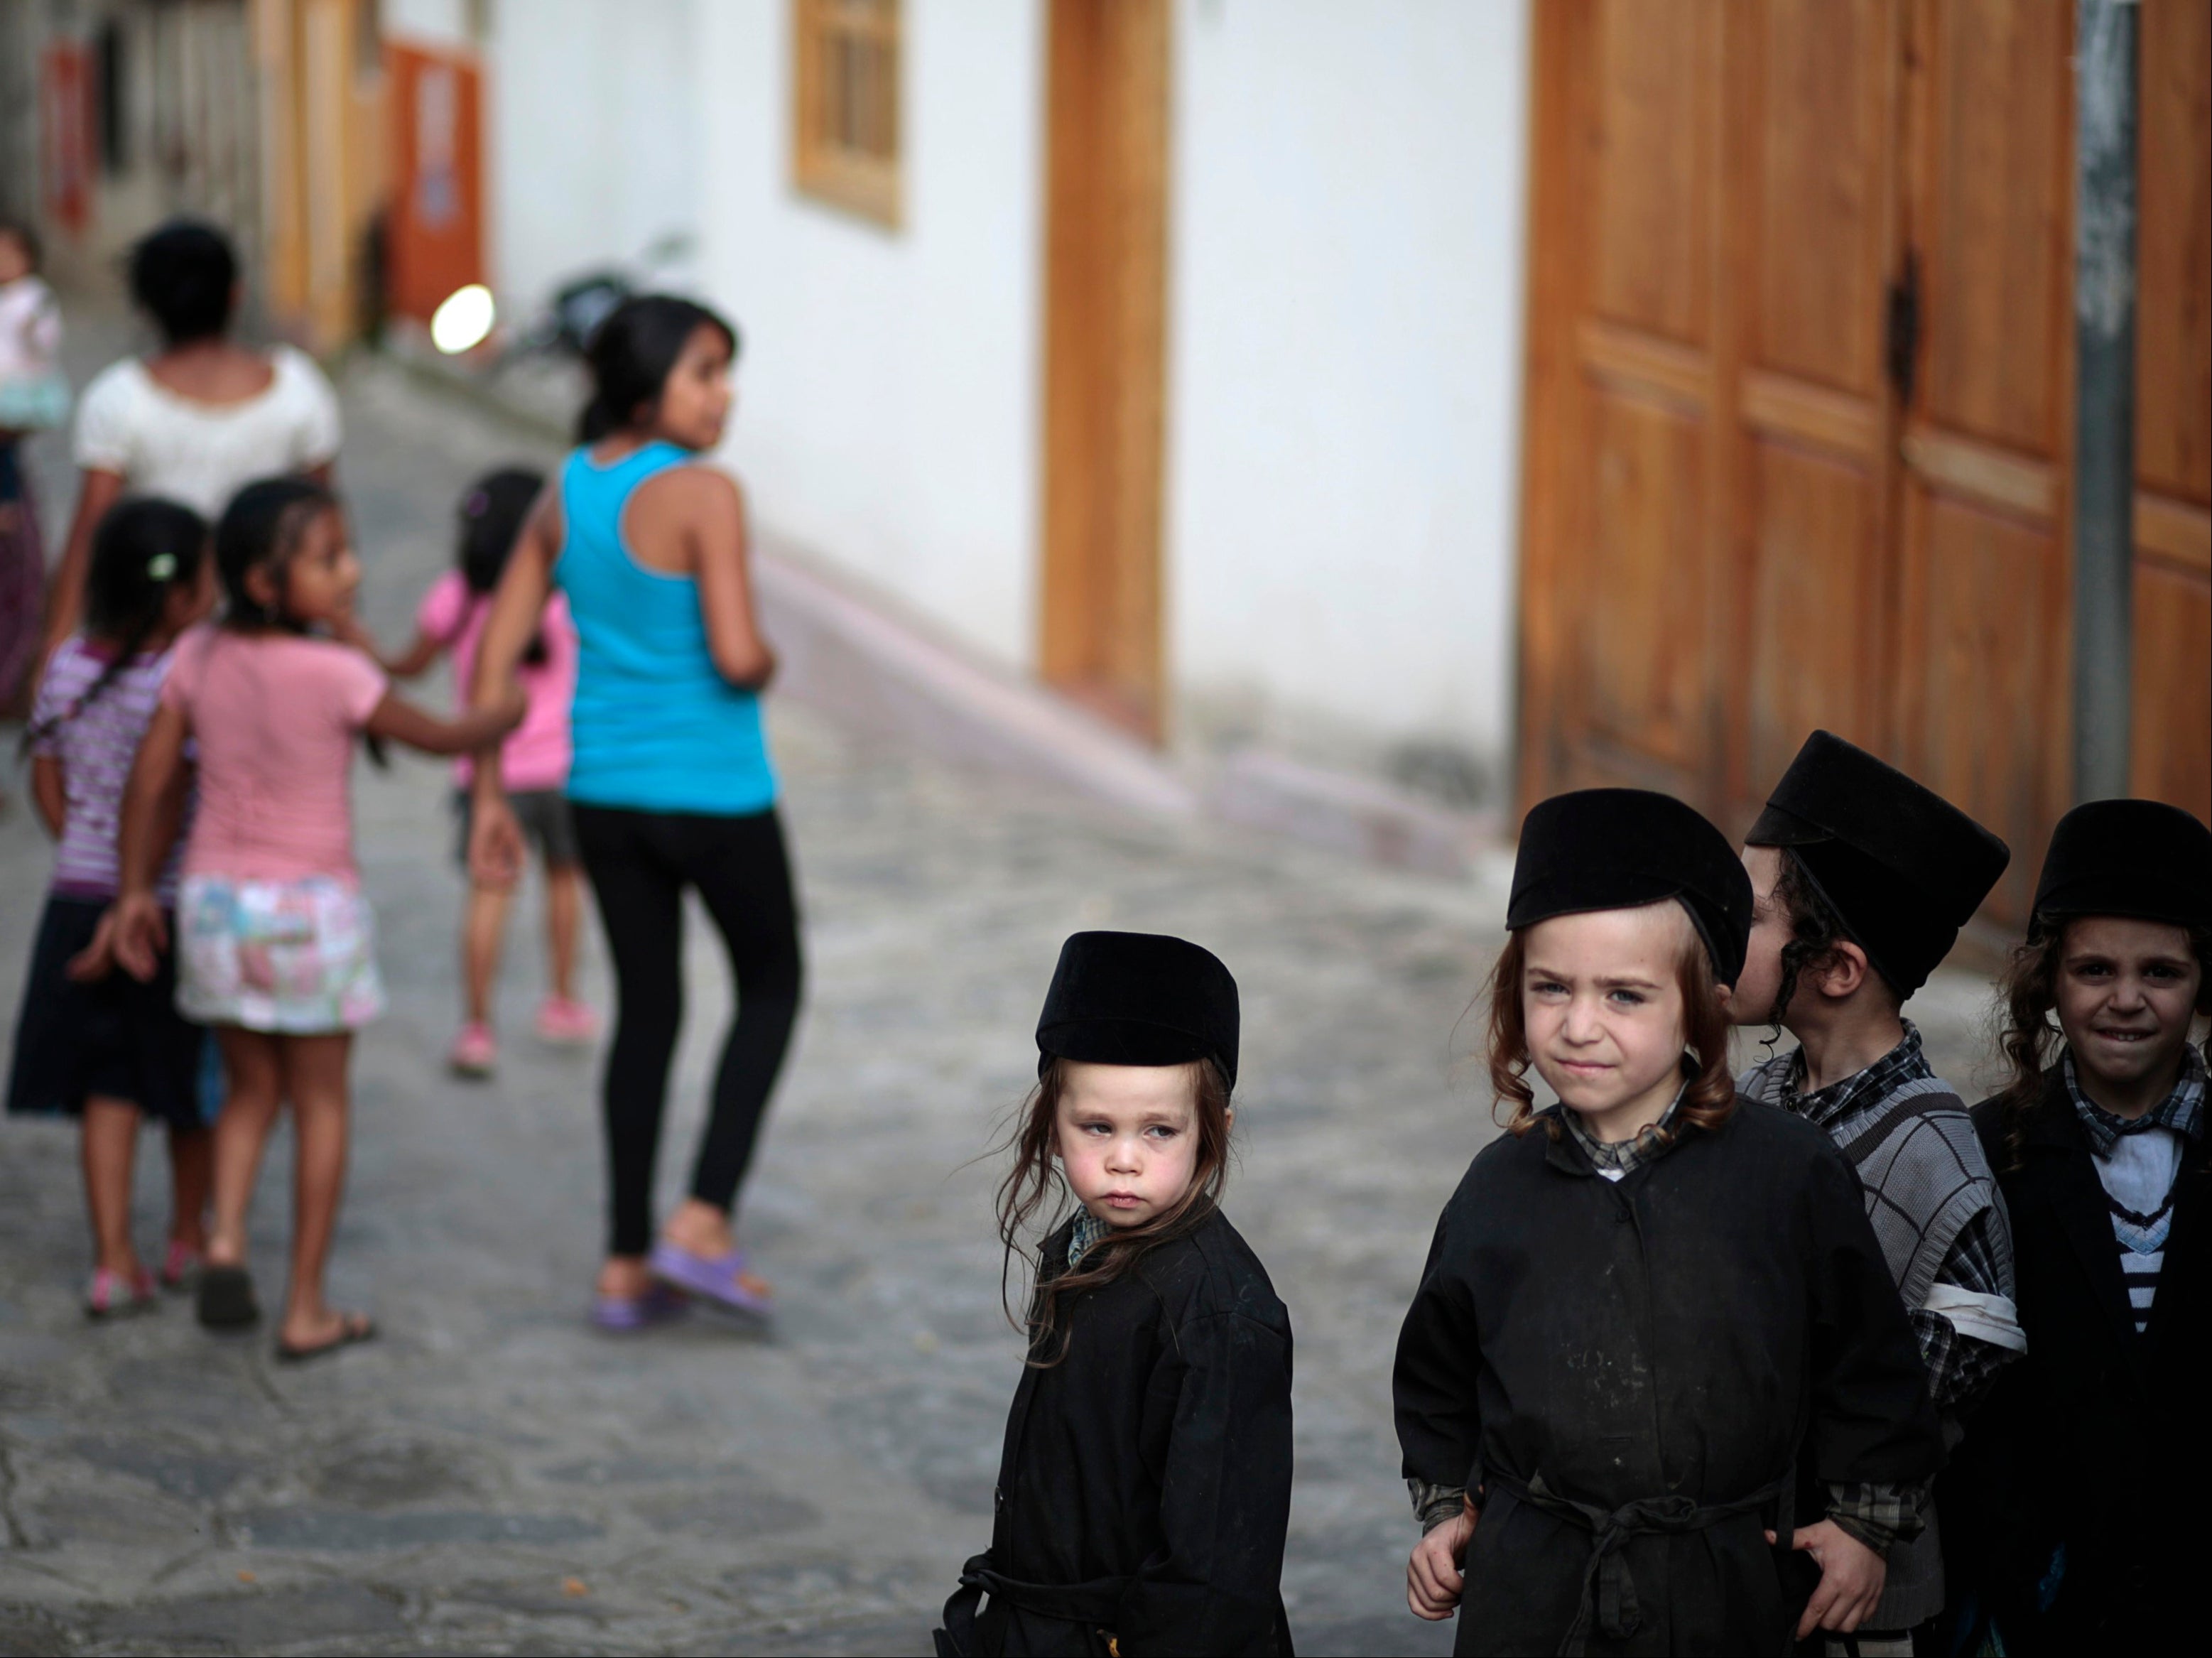 Children of a Jewish community stand on a street in the village of San Juan La Laguna August 24, 2014. A few months after moving from Canada to a remote part of Guatemala to find religious freedom, the group of ultra orthodox Jews have been forced out of their homes in a bitter conflict with hostile villagers. The Lev Tahor community packed its bags on Friday in San Juan la Laguna, west of Guatemala City, to board buses bound for the capital after weeks of friction with sections of the local population.